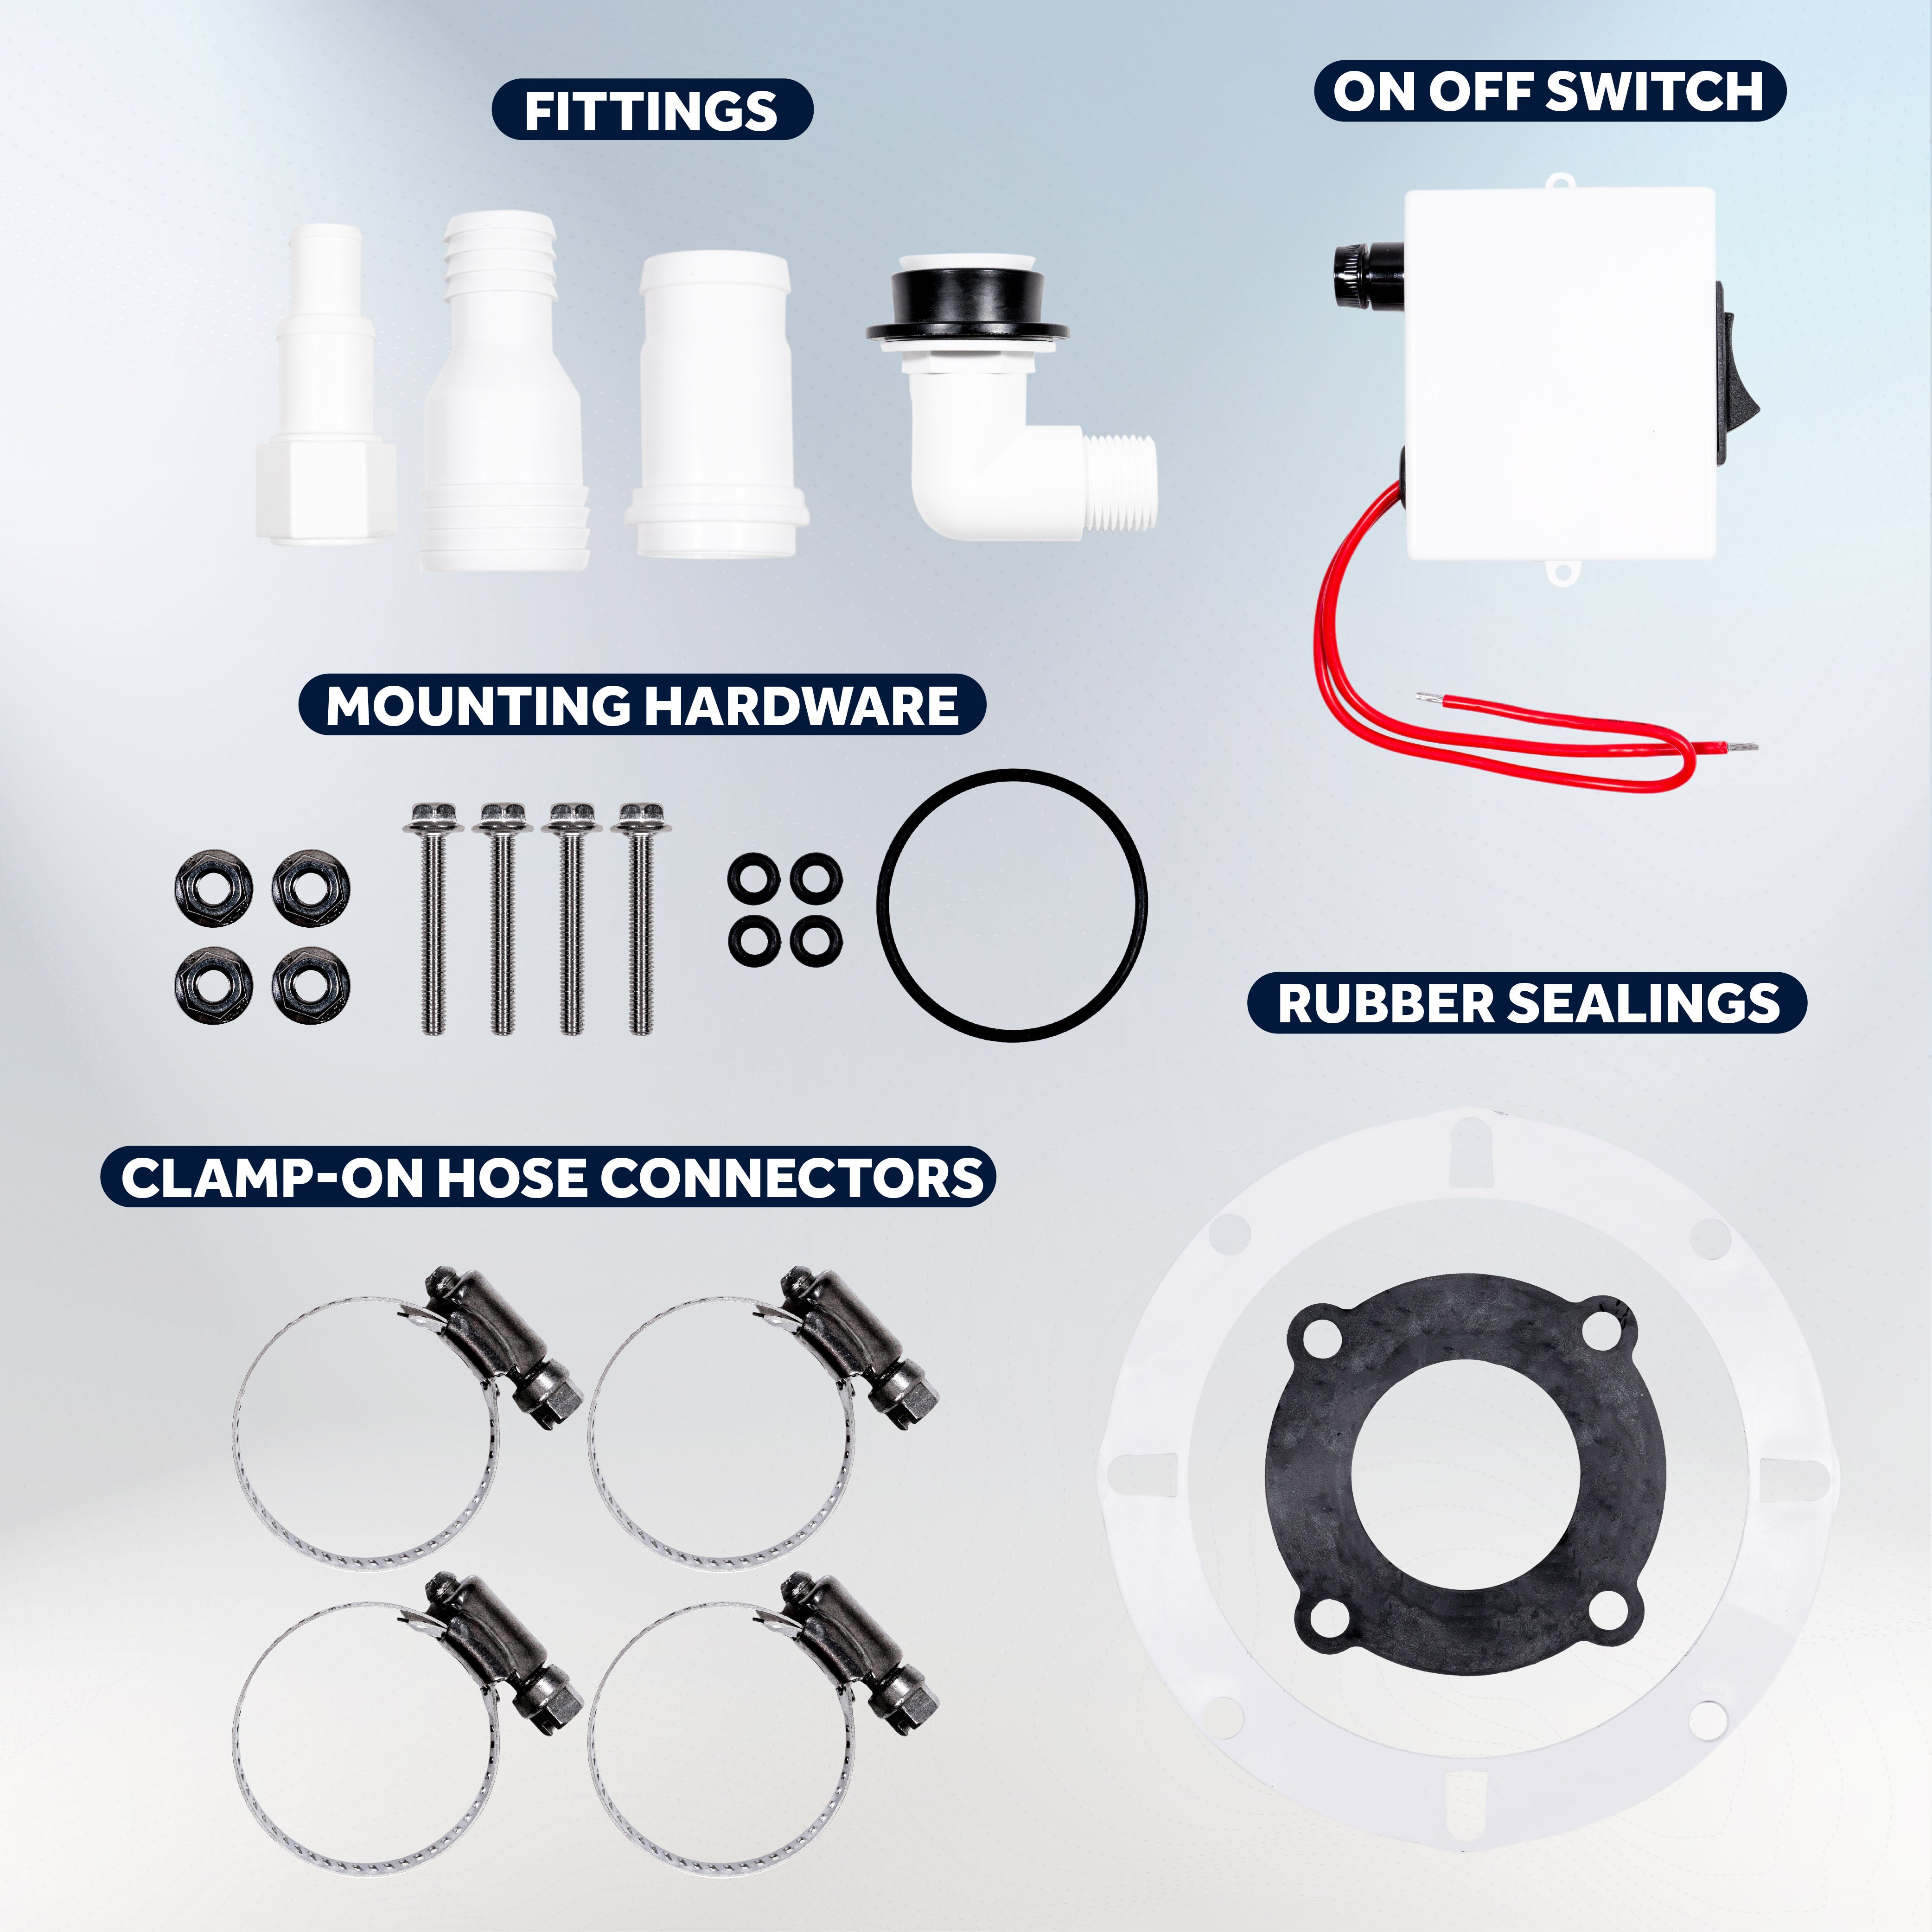 TMC Skirted Design Macerator Electric Toilet Conversion Kit with Clamp-On Hose Connection - 12V DC - FO4703